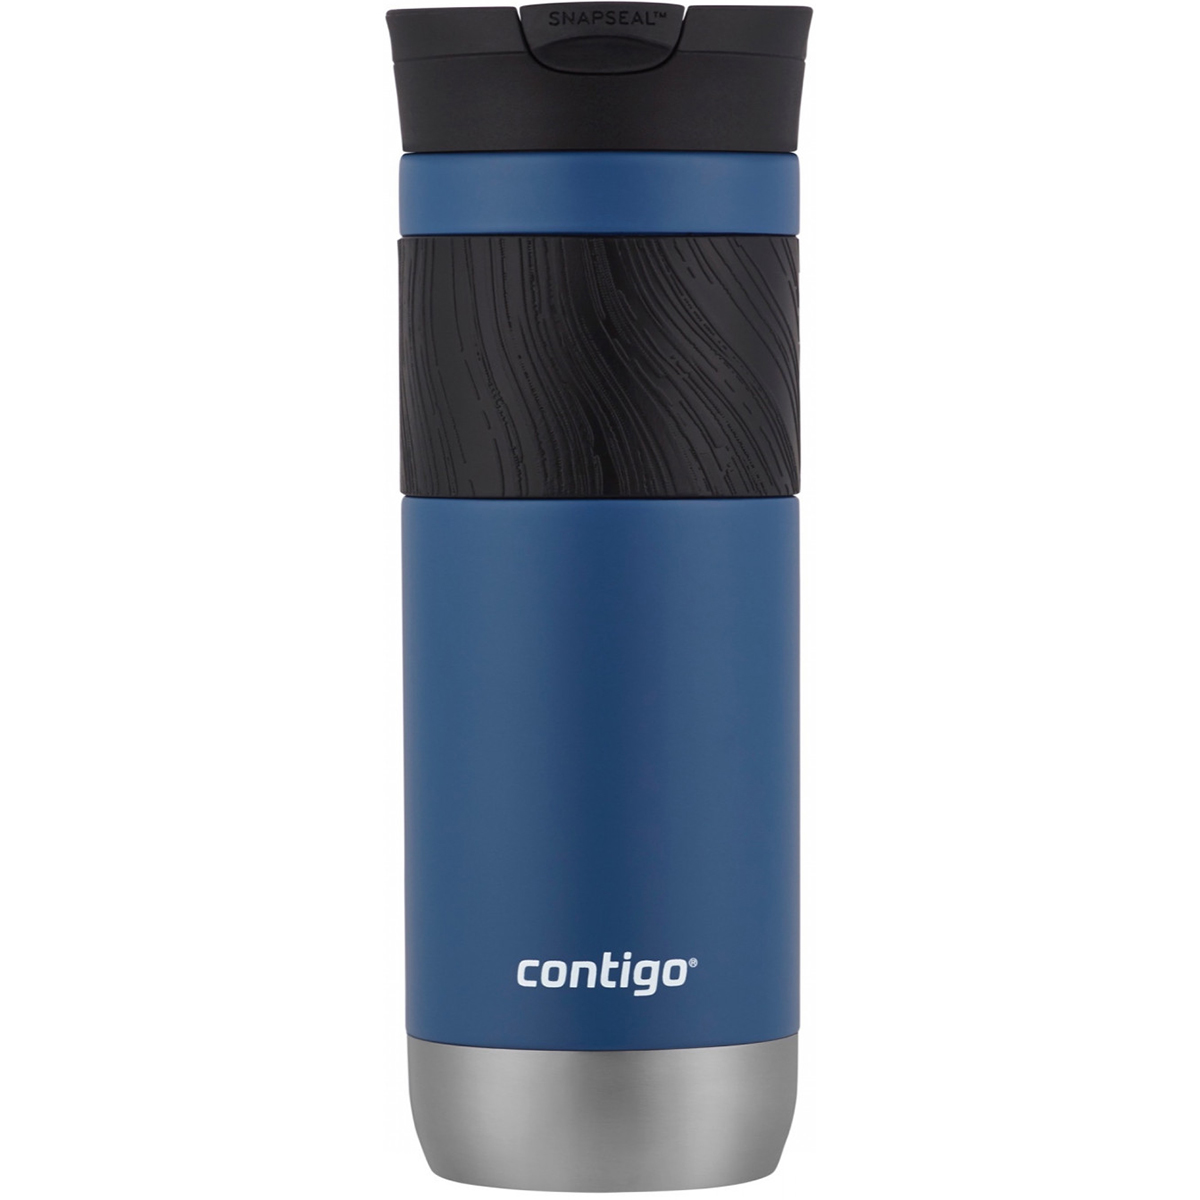 Contigo Byron 2.0 Stainless Steel Travel Mug with SNAPSEAL Lid and Grip Blue Corn, 20 fl oz. - image 1 of 6